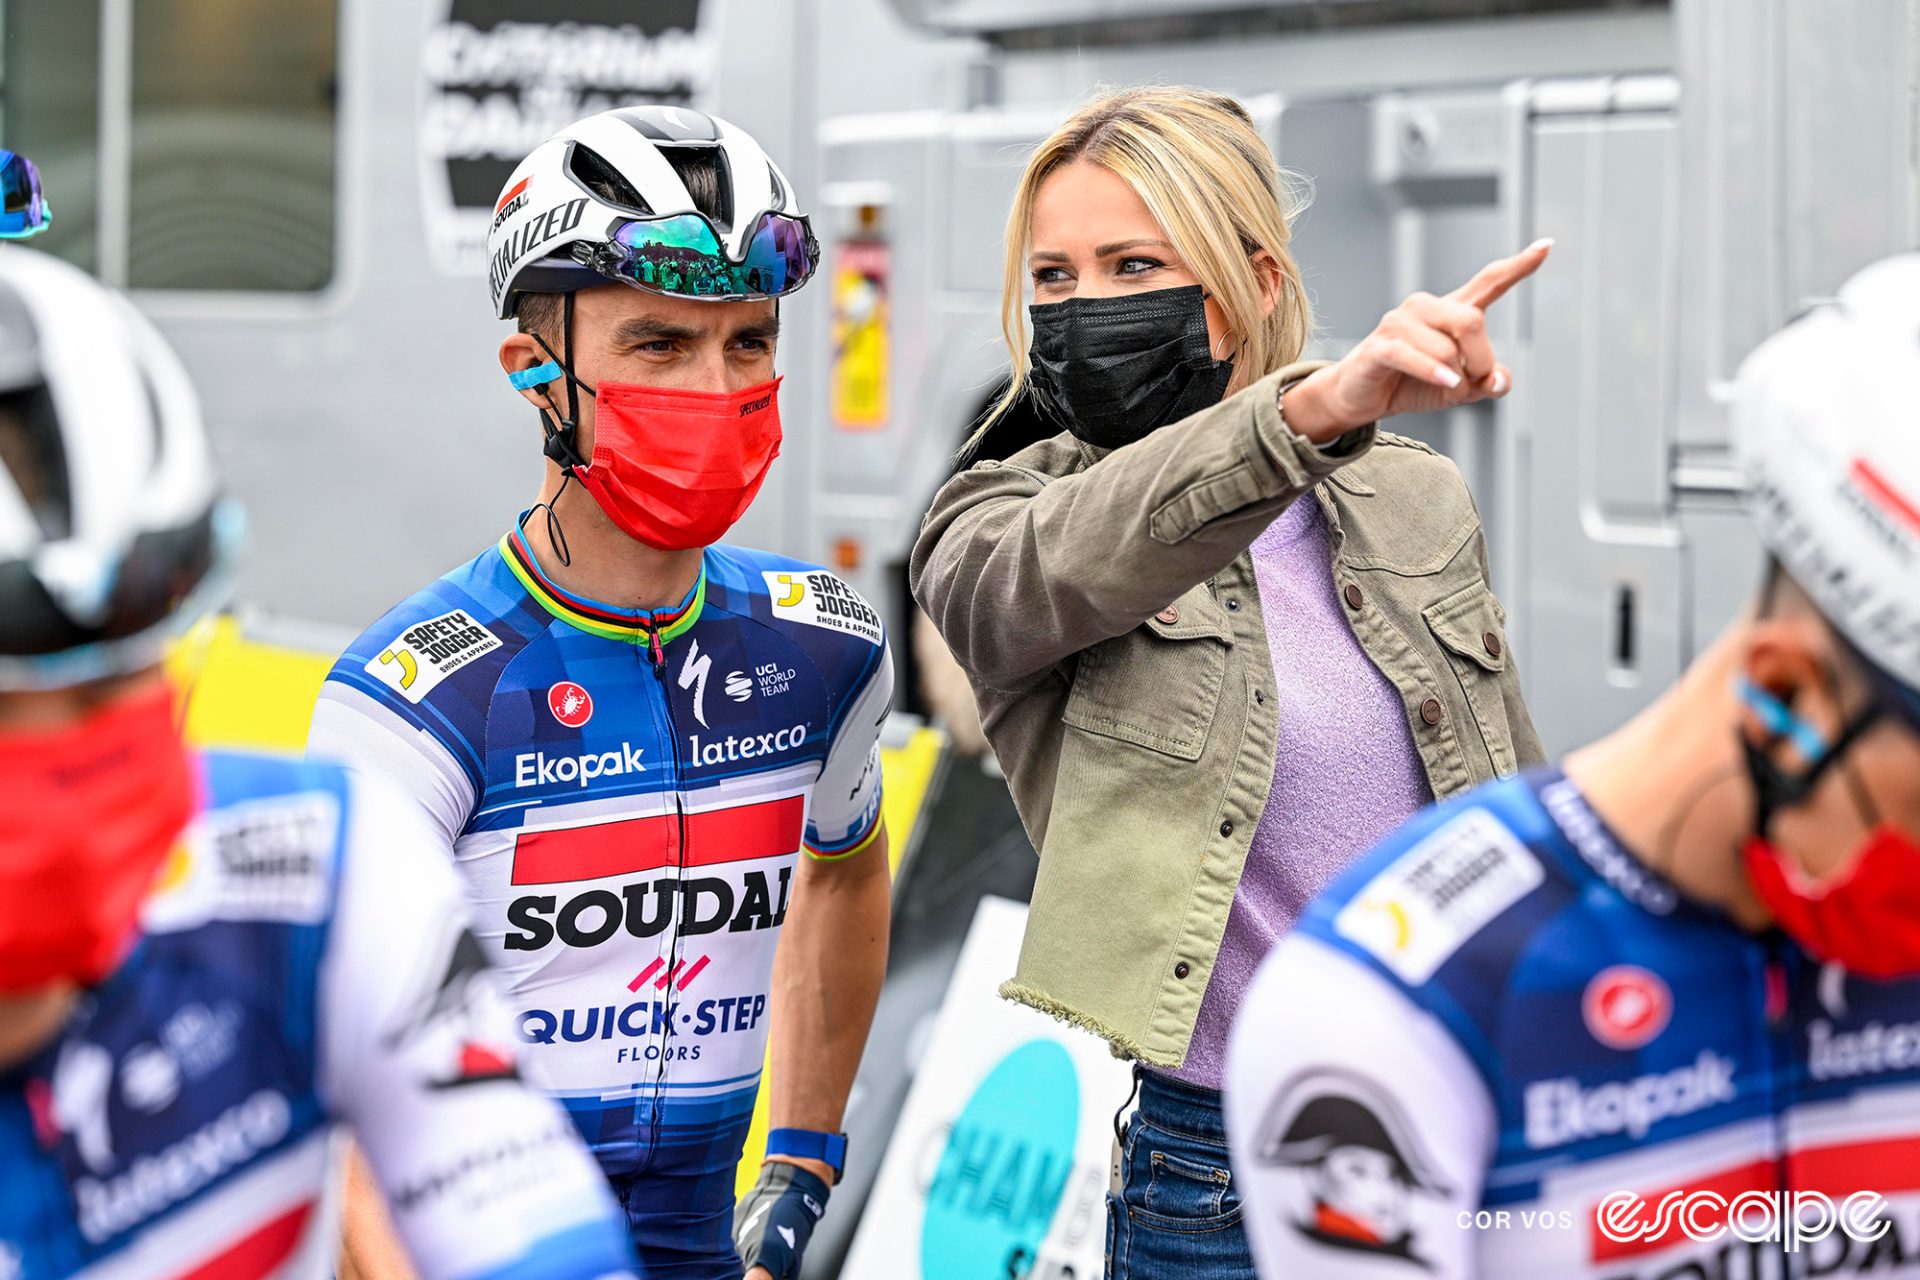 Julian Alaphilippe and Marion Rousse at the start of a race; both are wearing masks and Rousse is facing Alaphilippe while pointing to something off-camera.